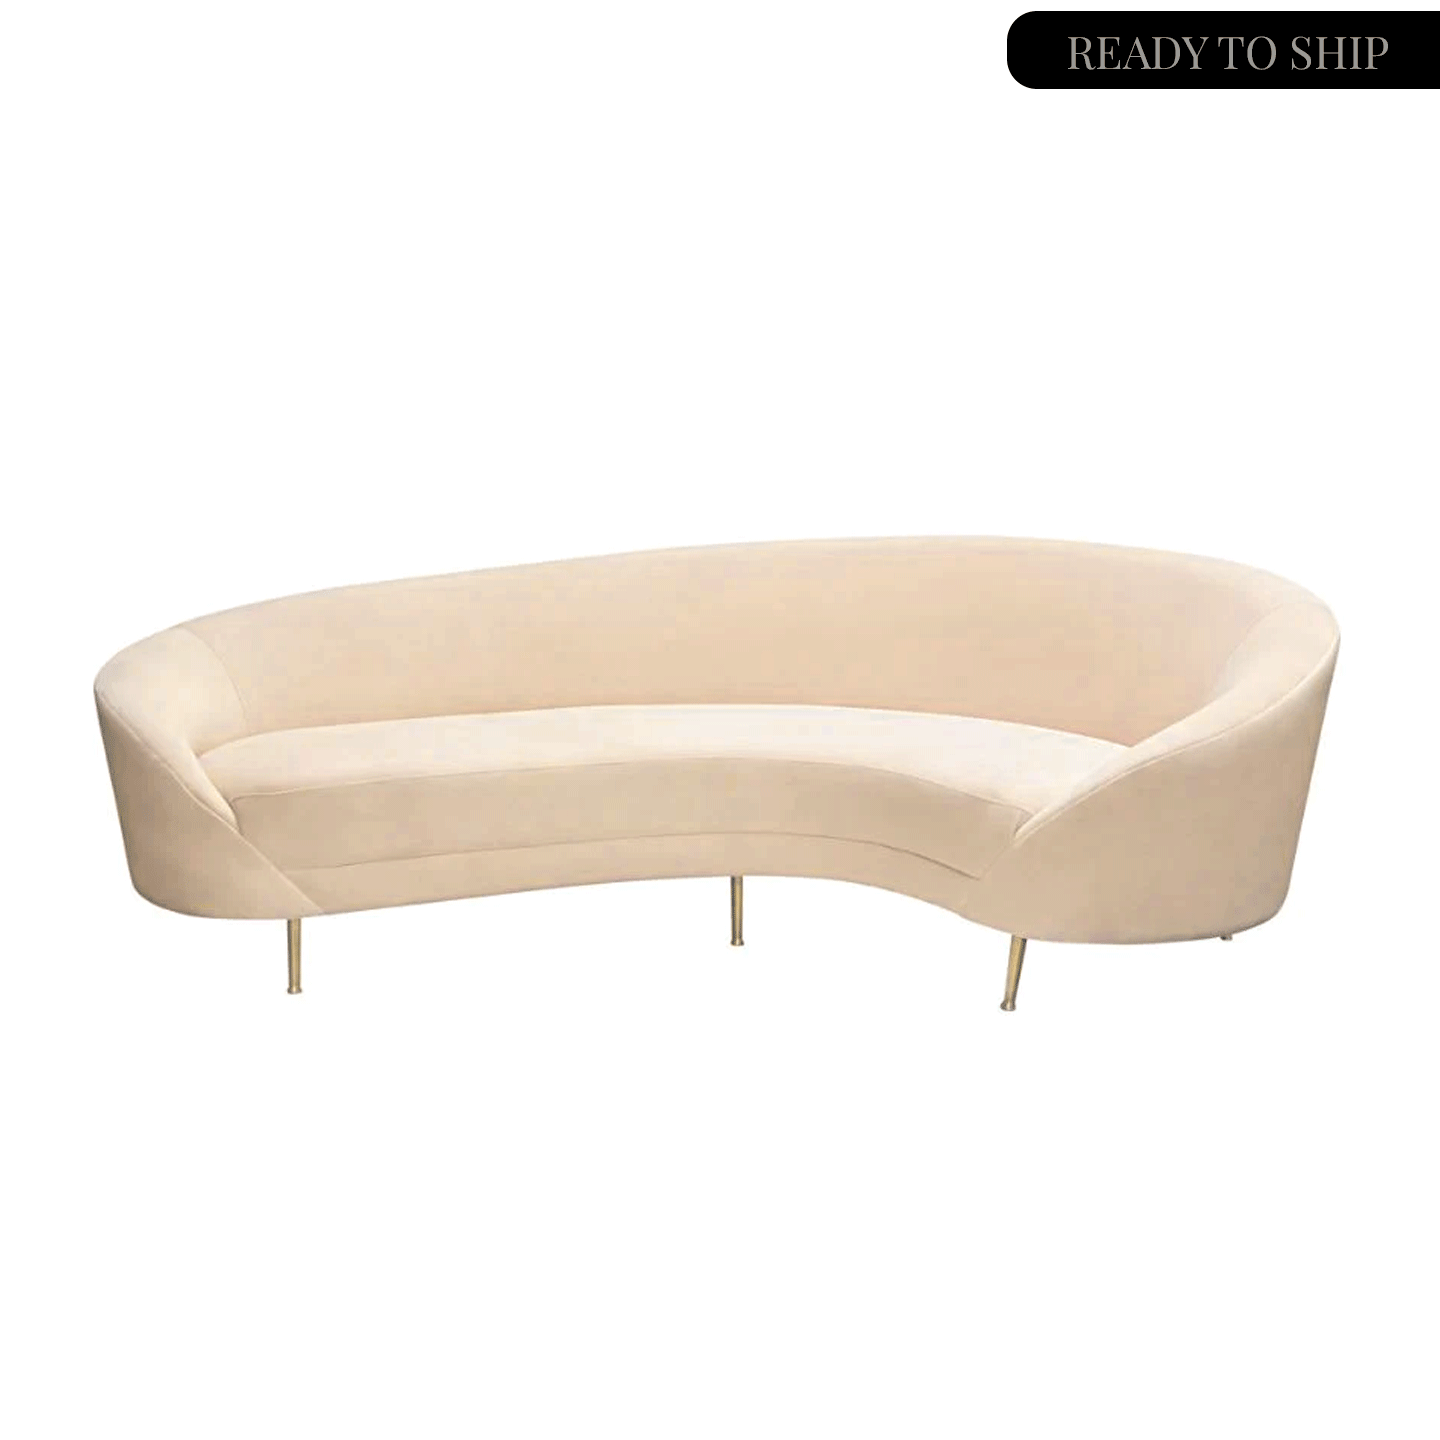 Proctor Curved Sofa